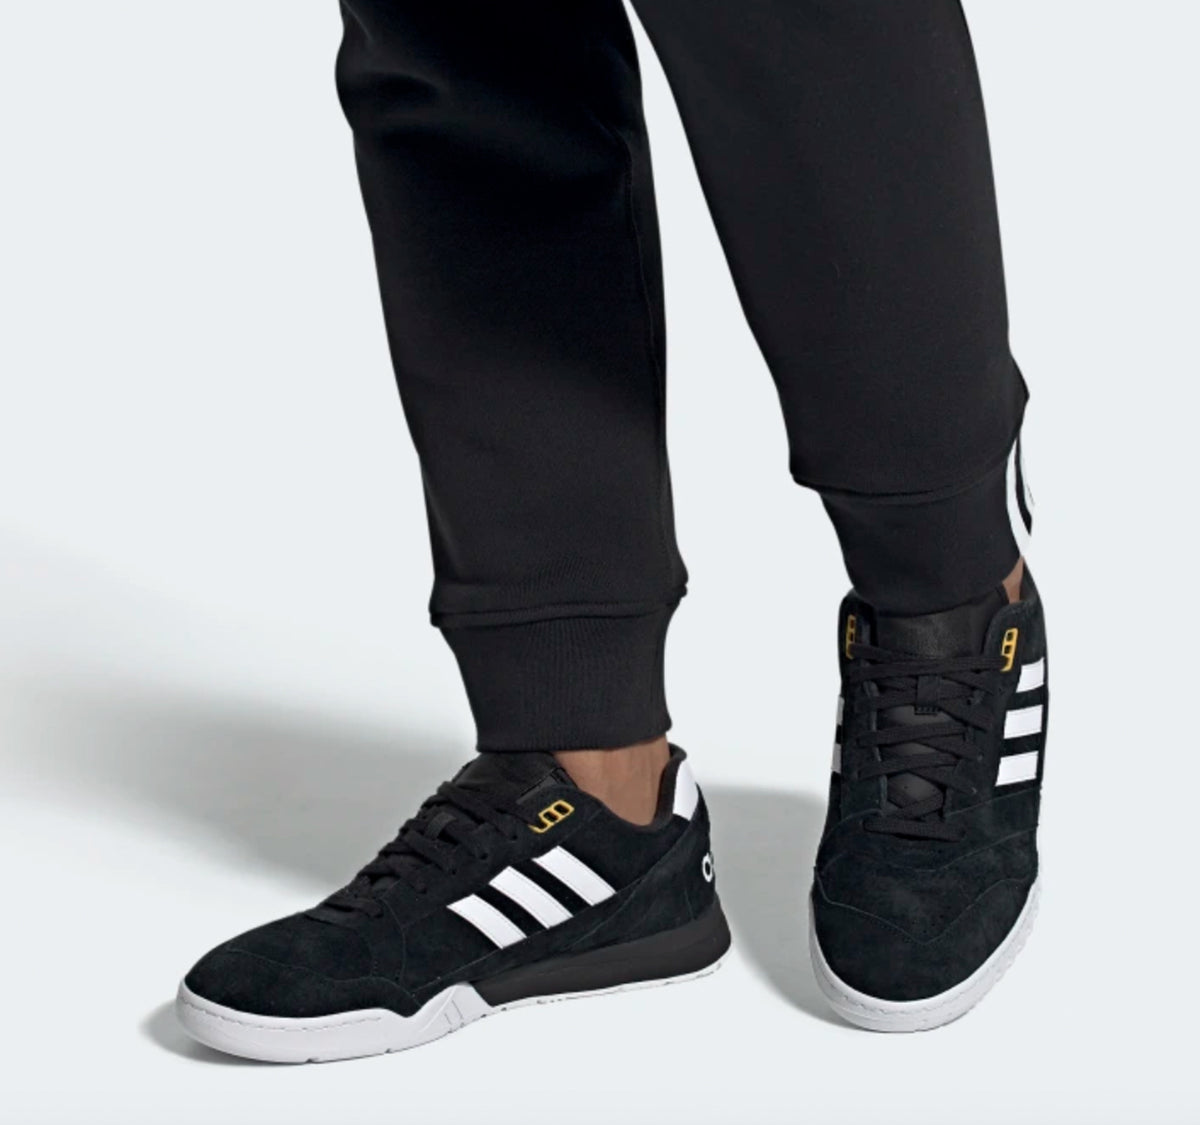 Adidas A.R. Trainer Men's Sneaker– On The EDGE